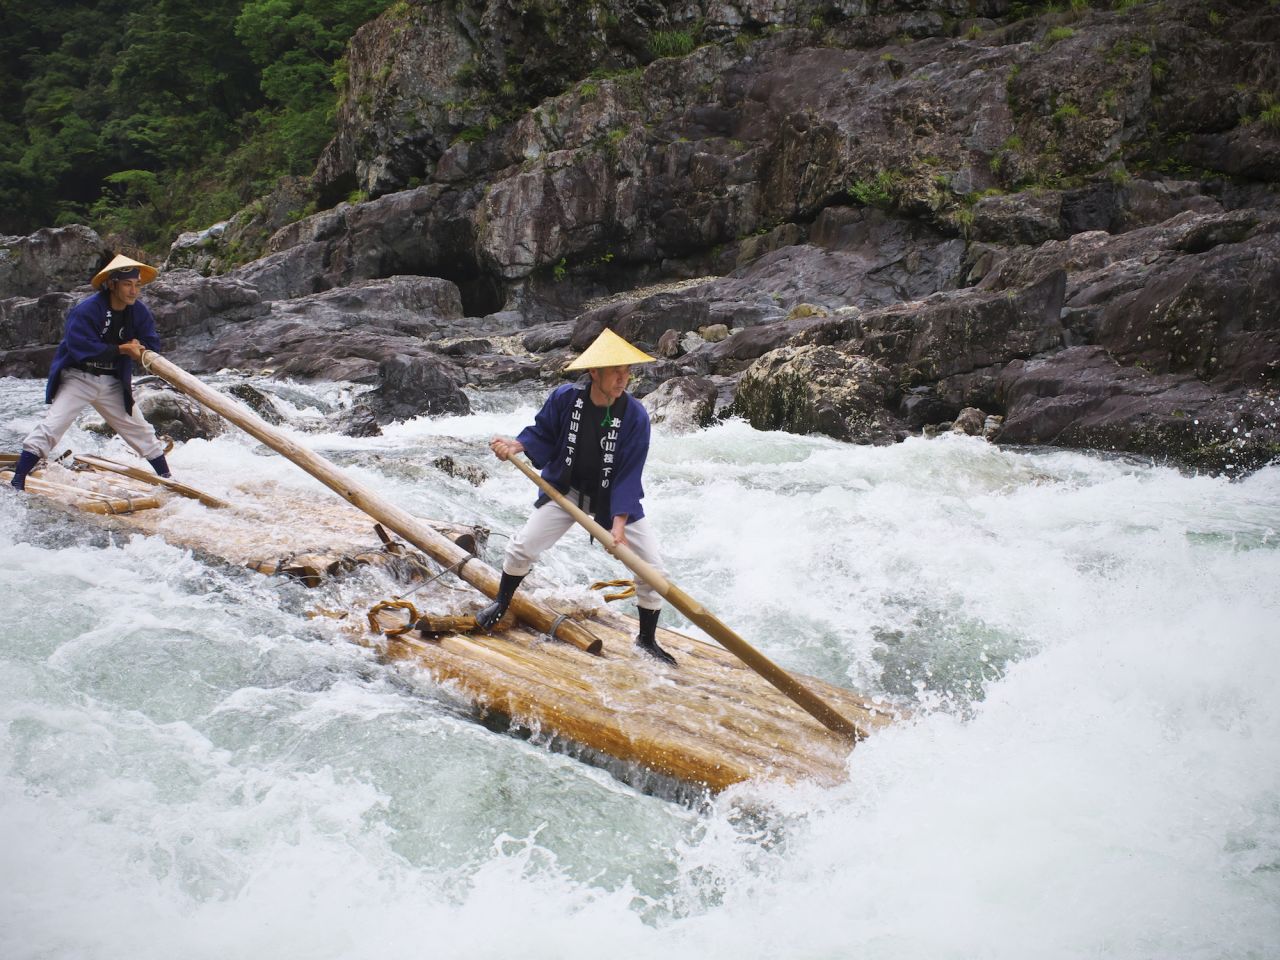 The adventure sport was inspired by Japan's traditional lumber industry. Felled wood was assembled into rafts then sent down the river -- a transport method used for more than 600 years. In the late 1970s it was introduced to tourists. 